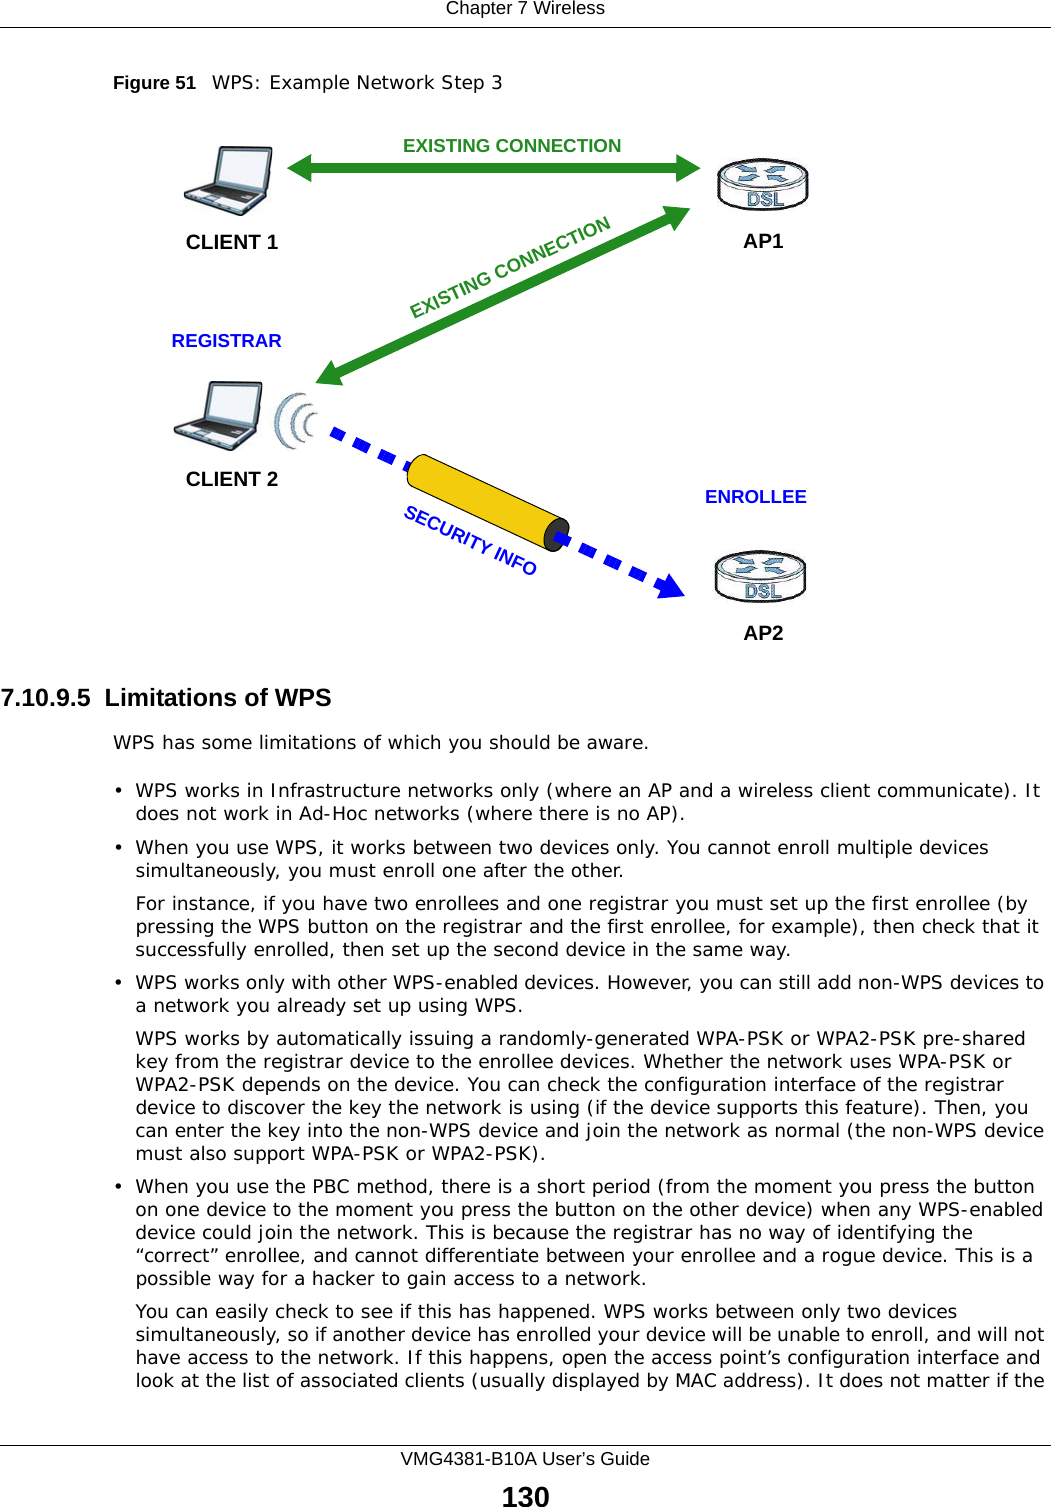 Chapter 7 WirelessVMG4381-B10A User’s Guide130Figure 51   WPS: Example Network Step 37.10.9.5  Limitations of WPSWPS has some limitations of which you should be aware. • WPS works in Infrastructure networks only (where an AP and a wireless client communicate). It does not work in Ad-Hoc networks (where there is no AP).• When you use WPS, it works between two devices only. You cannot enroll multiple devices simultaneously, you must enroll one after the other. For instance, if you have two enrollees and one registrar you must set up the first enrollee (by pressing the WPS button on the registrar and the first enrollee, for example), then check that it successfully enrolled, then set up the second device in the same way.• WPS works only with other WPS-enabled devices. However, you can still add non-WPS devices to a network you already set up using WPS. WPS works by automatically issuing a randomly-generated WPA-PSK or WPA2-PSK pre-shared key from the registrar device to the enrollee devices. Whether the network uses WPA-PSK or WPA2-PSK depends on the device. You can check the configuration interface of the registrar device to discover the key the network is using (if the device supports this feature). Then, you can enter the key into the non-WPS device and join the network as normal (the non-WPS device must also support WPA-PSK or WPA2-PSK).• When you use the PBC method, there is a short period (from the moment you press the button on one device to the moment you press the button on the other device) when any WPS-enabled device could join the network. This is because the registrar has no way of identifying the “correct” enrollee, and cannot differentiate between your enrollee and a rogue device. This is a possible way for a hacker to gain access to a network.You can easily check to see if this has happened. WPS works between only two devices simultaneously, so if another device has enrolled your device will be unable to enroll, and will not have access to the network. If this happens, open the access point’s configuration interface and look at the list of associated clients (usually displayed by MAC address). It does not matter if the CLIENT 1 AP1REGISTRARCLIENT 2EXISTING CONNECTIONSECURITY INFOENROLLEEAP2EXISTING CONNECTION